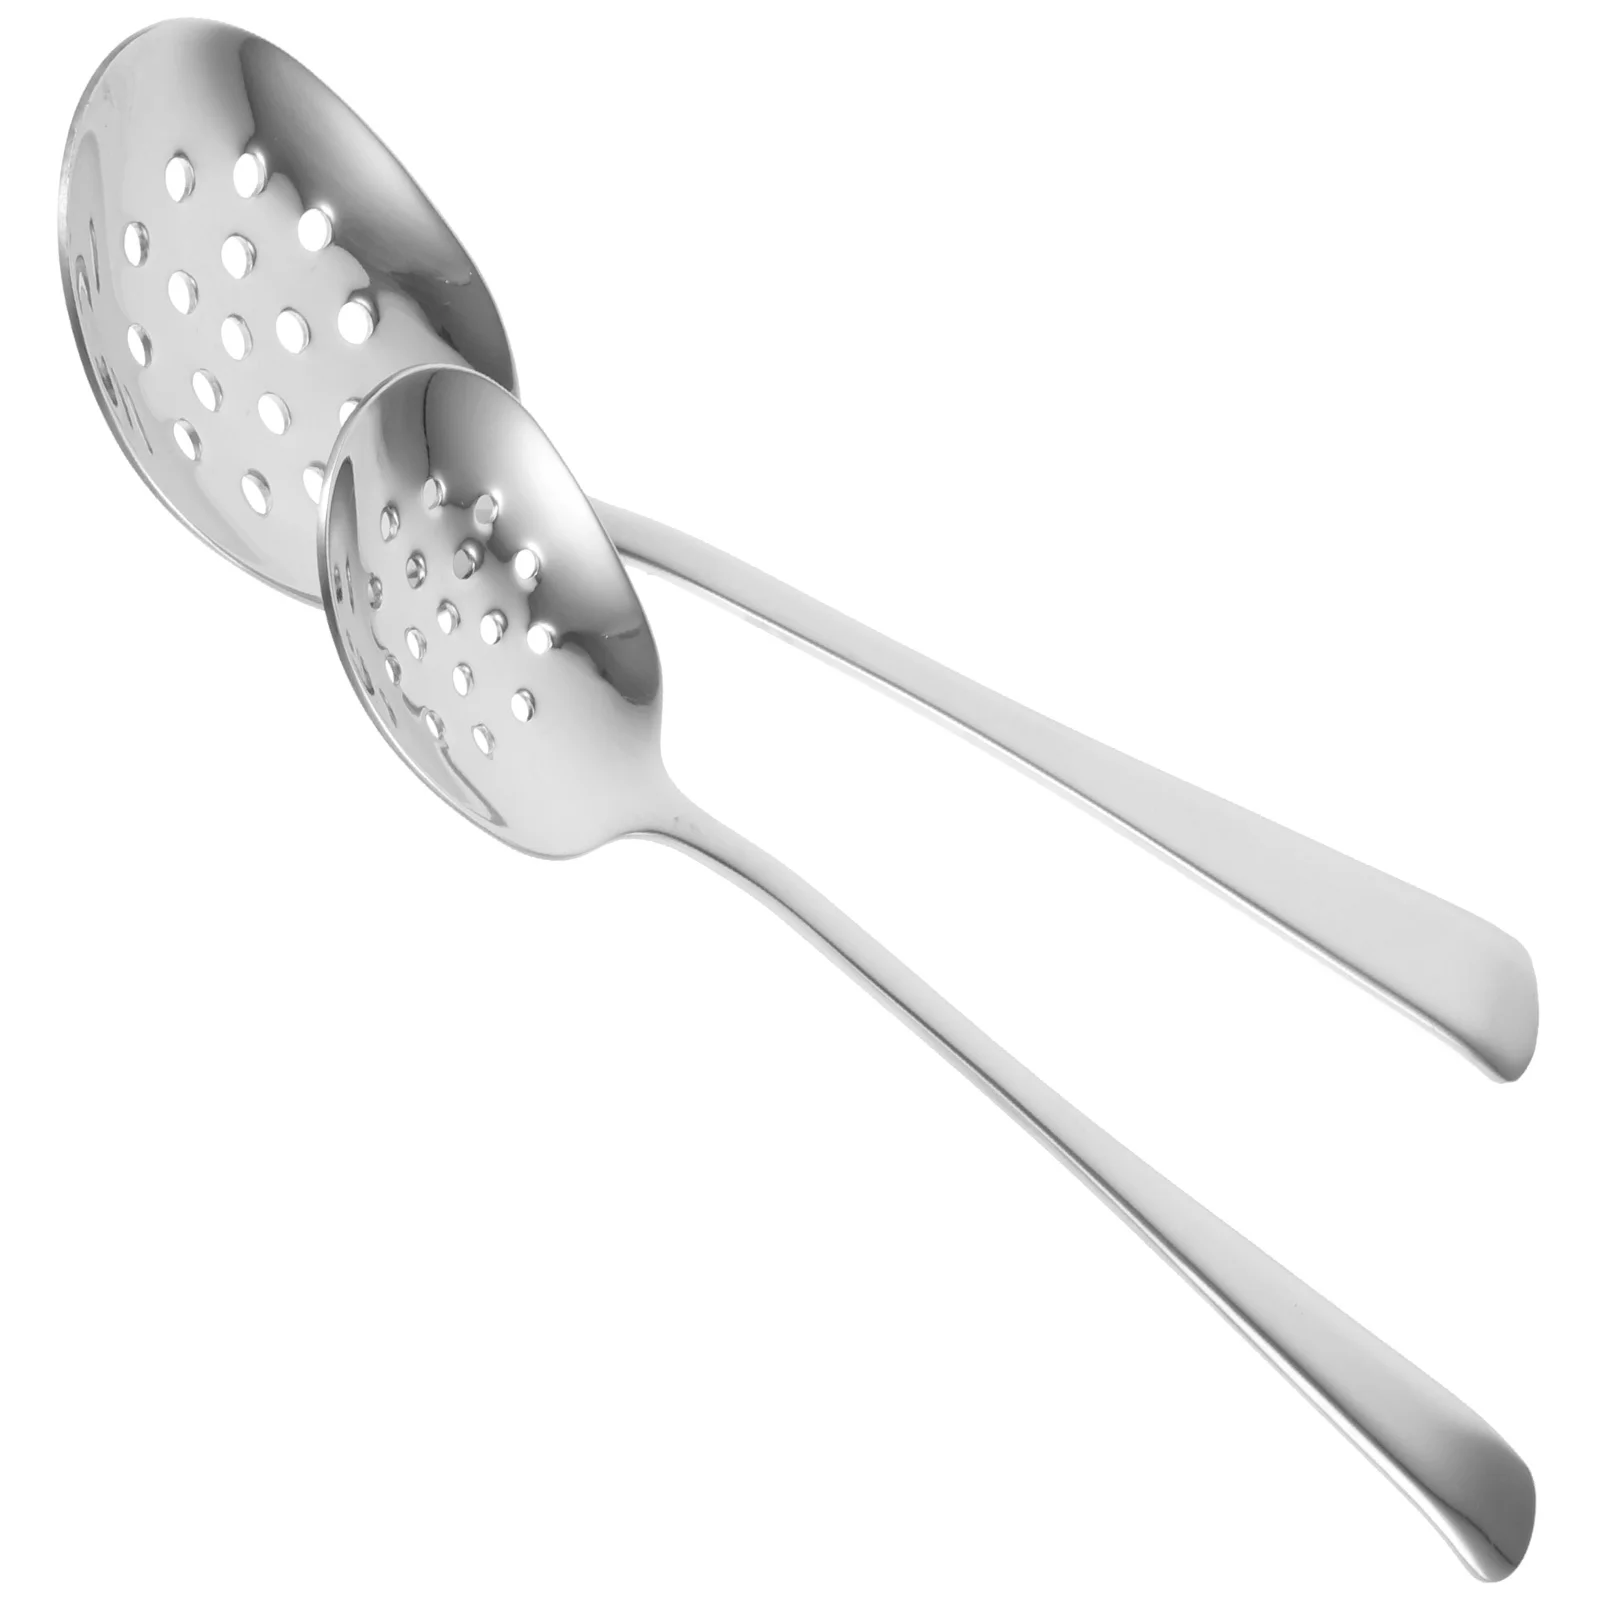 

2 Pcs Stainless Steel Serving Spoon Multi-use Slotted Cooking Flatware Spoons Soup Colander